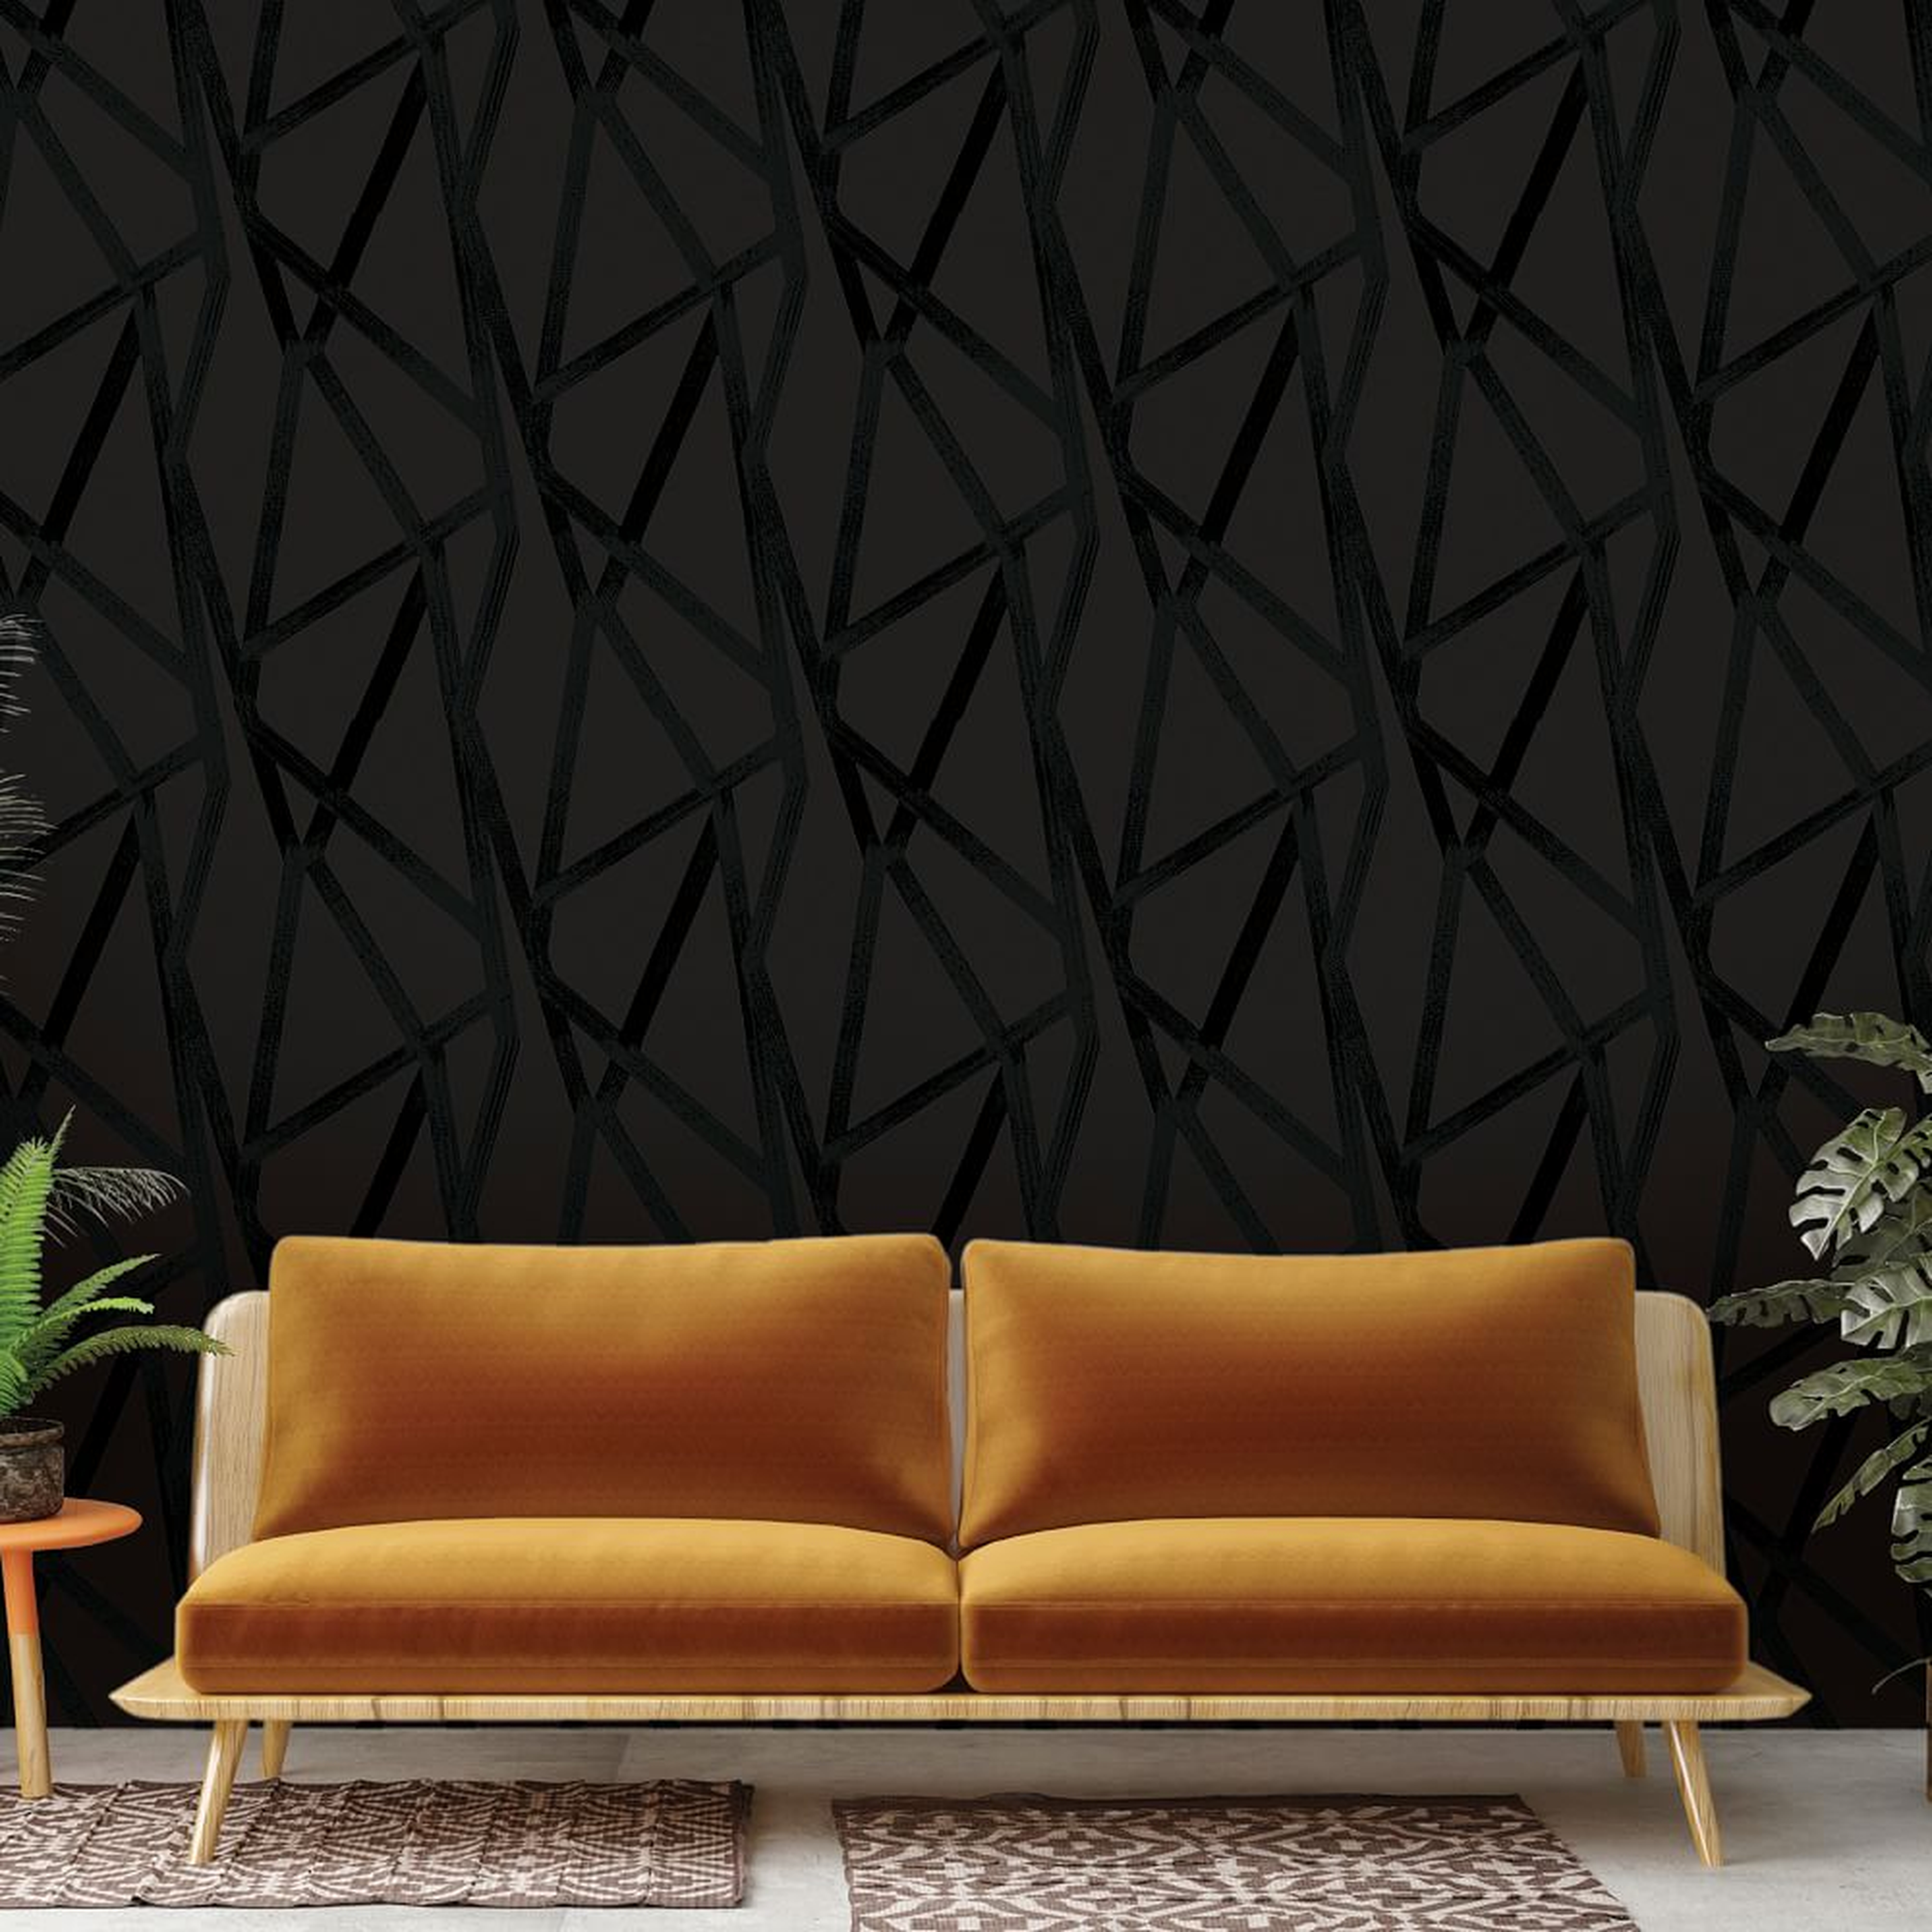 Tempaper Peel & Stick Intersections Wall Paper, Black On Black - West Elm